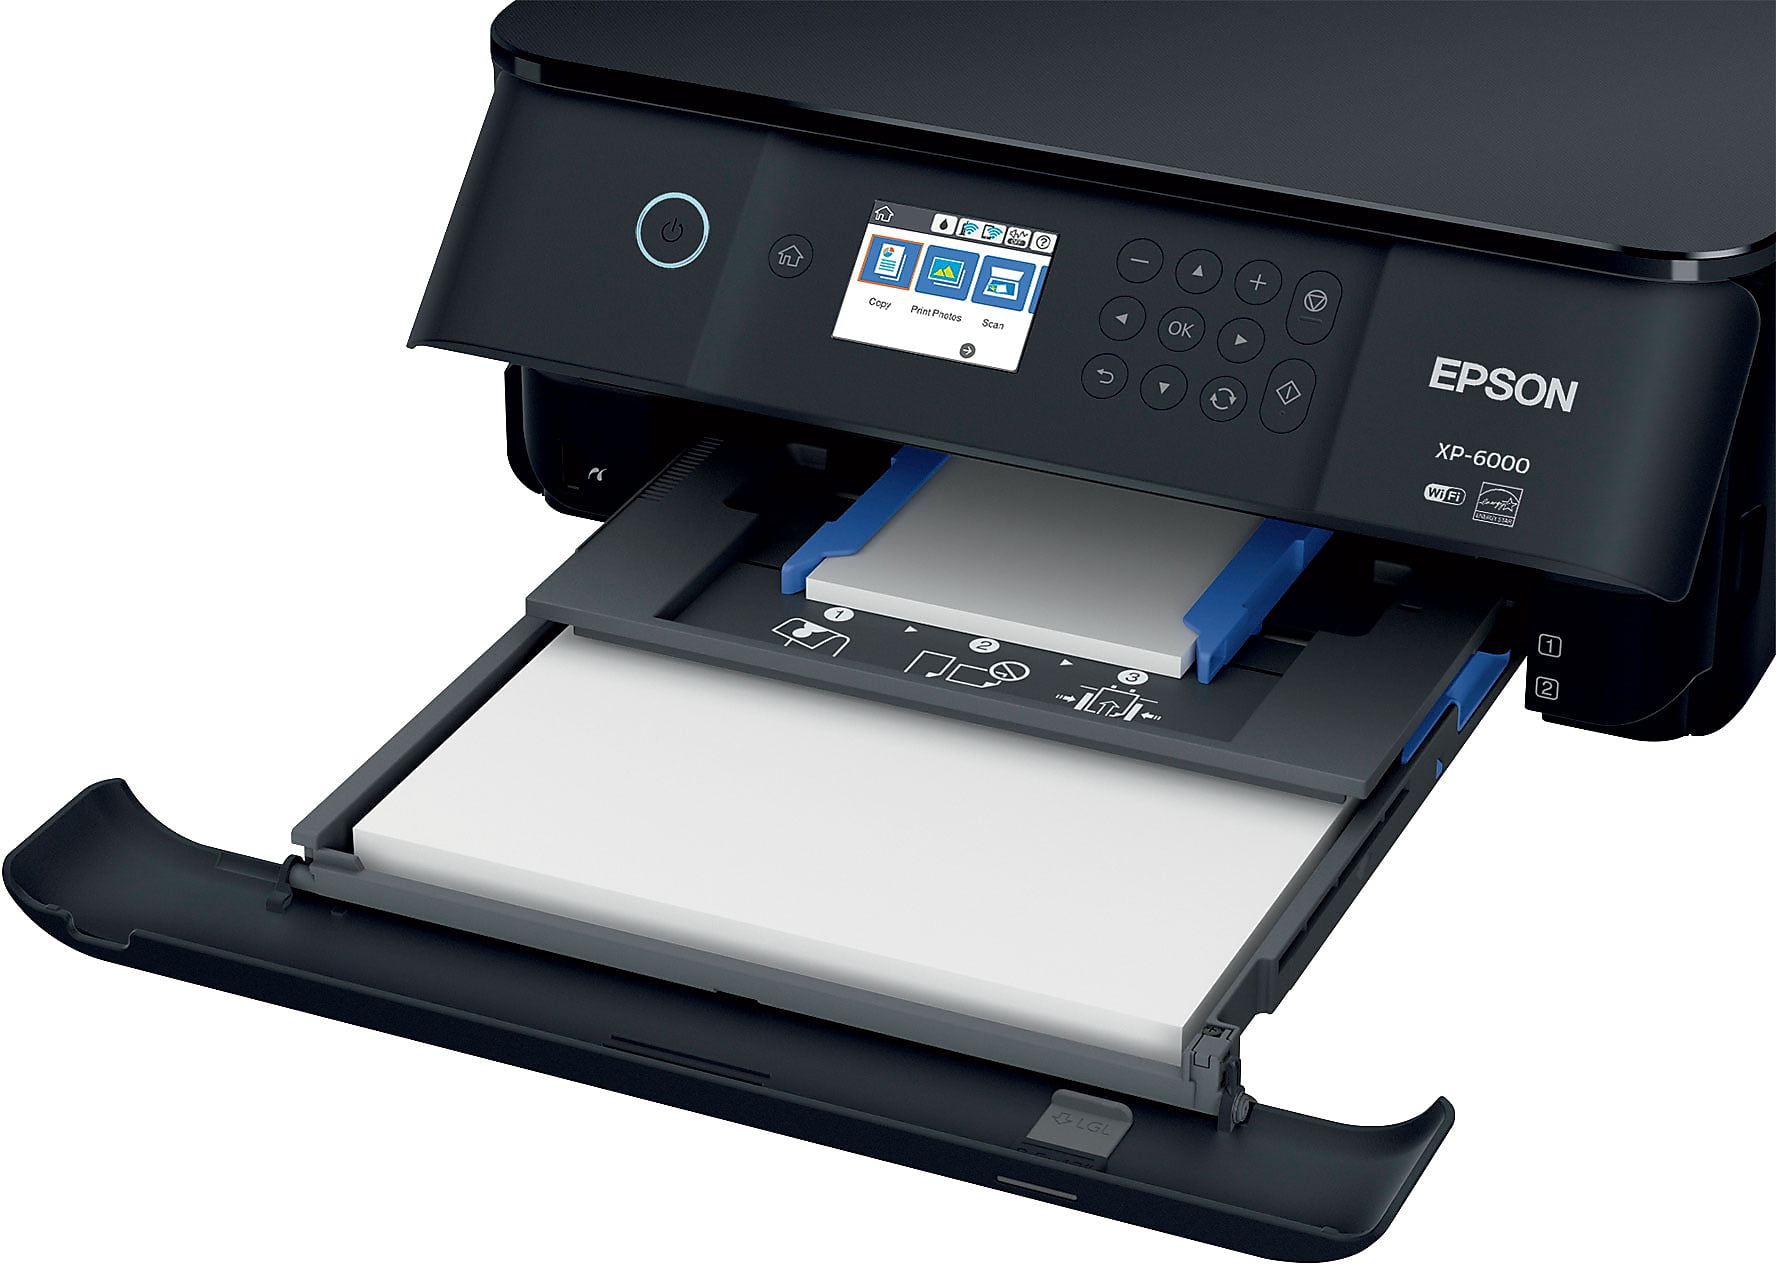 Epson Expression Premium XP-610 Small-in-One All-in-One Printer, Products